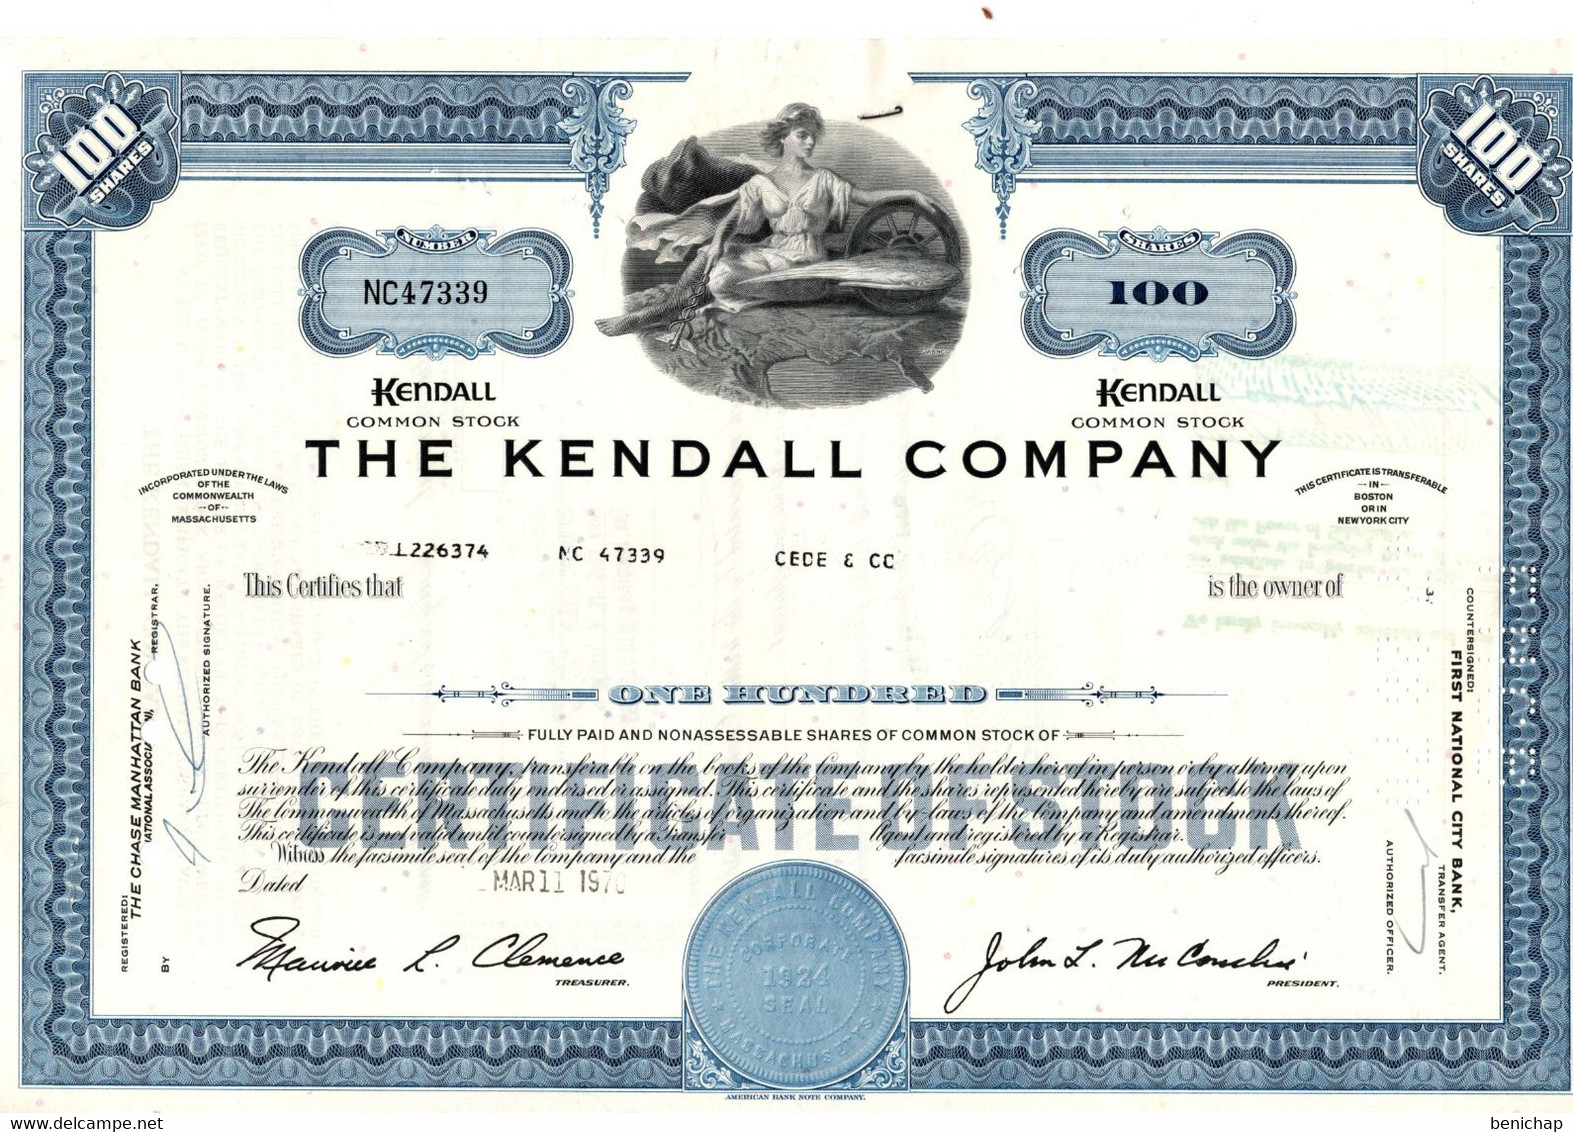 Kendall Company (Maintenant Colgate-Palmolive Company) -  Henry P. Kendall - 1970 - Industrie